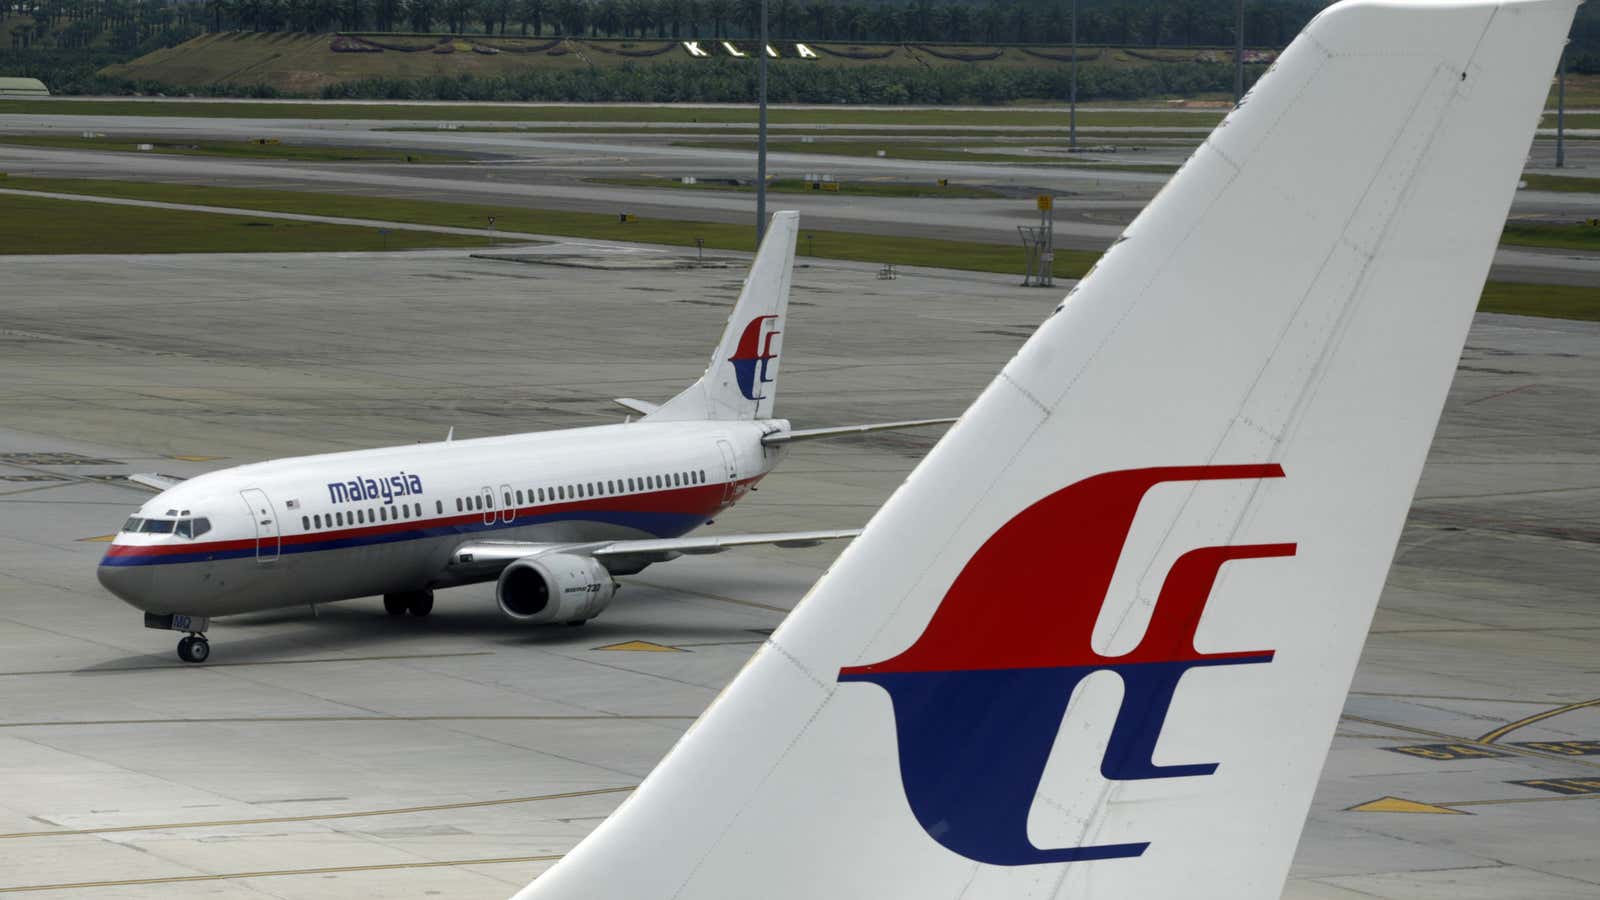 Malaysia Airlines has had a trying year.